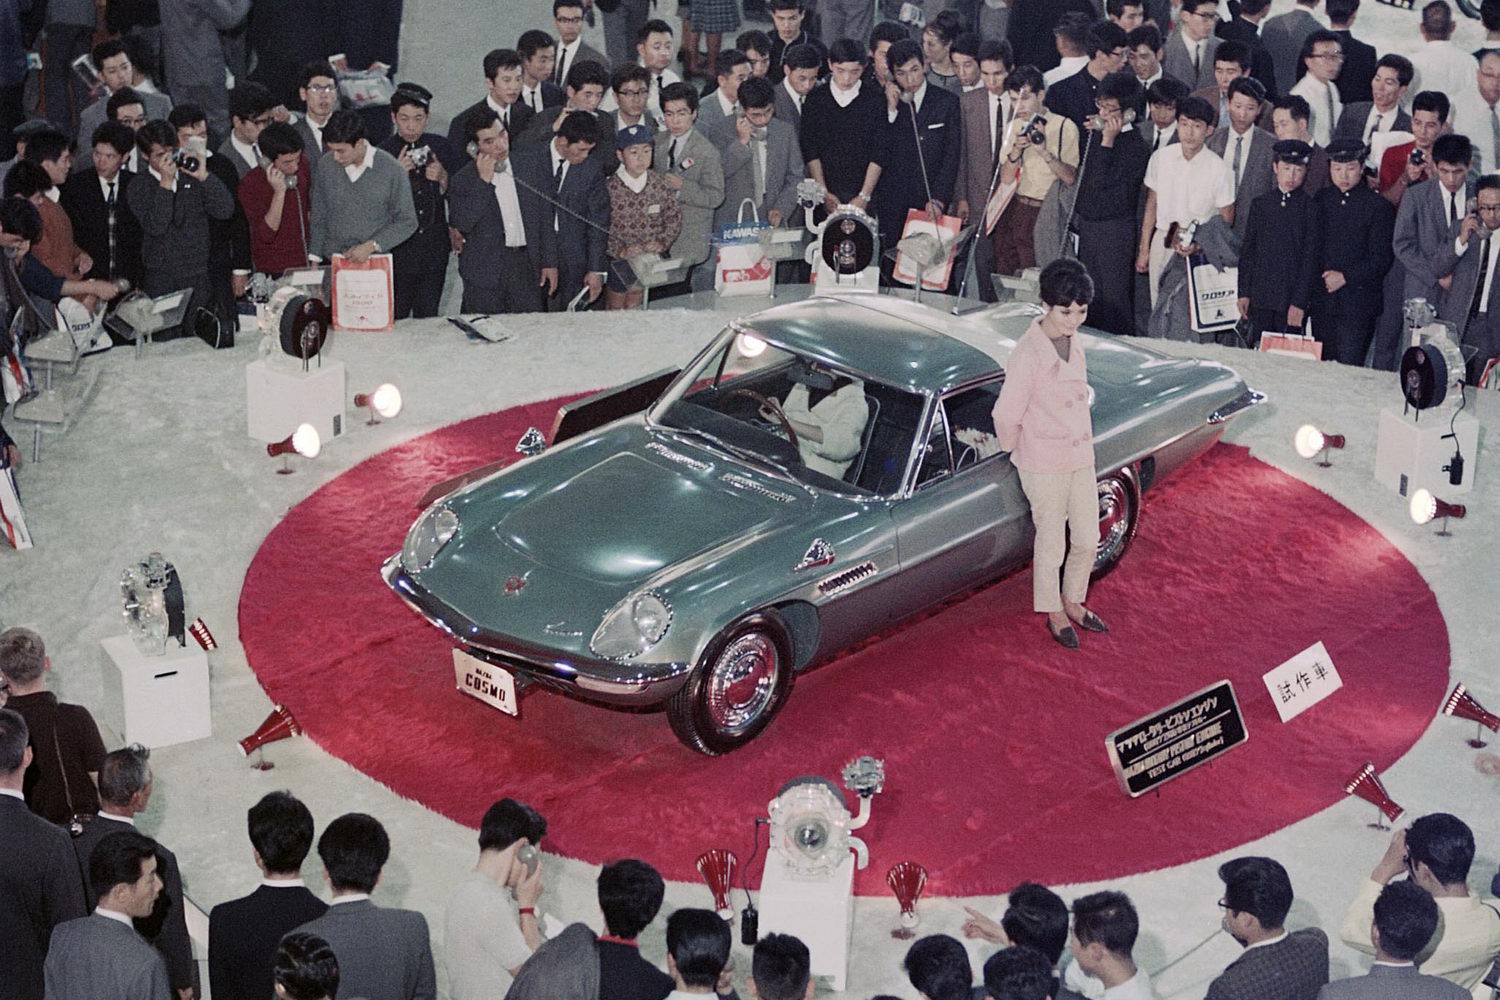 Mazda’s past gives us hope for the future